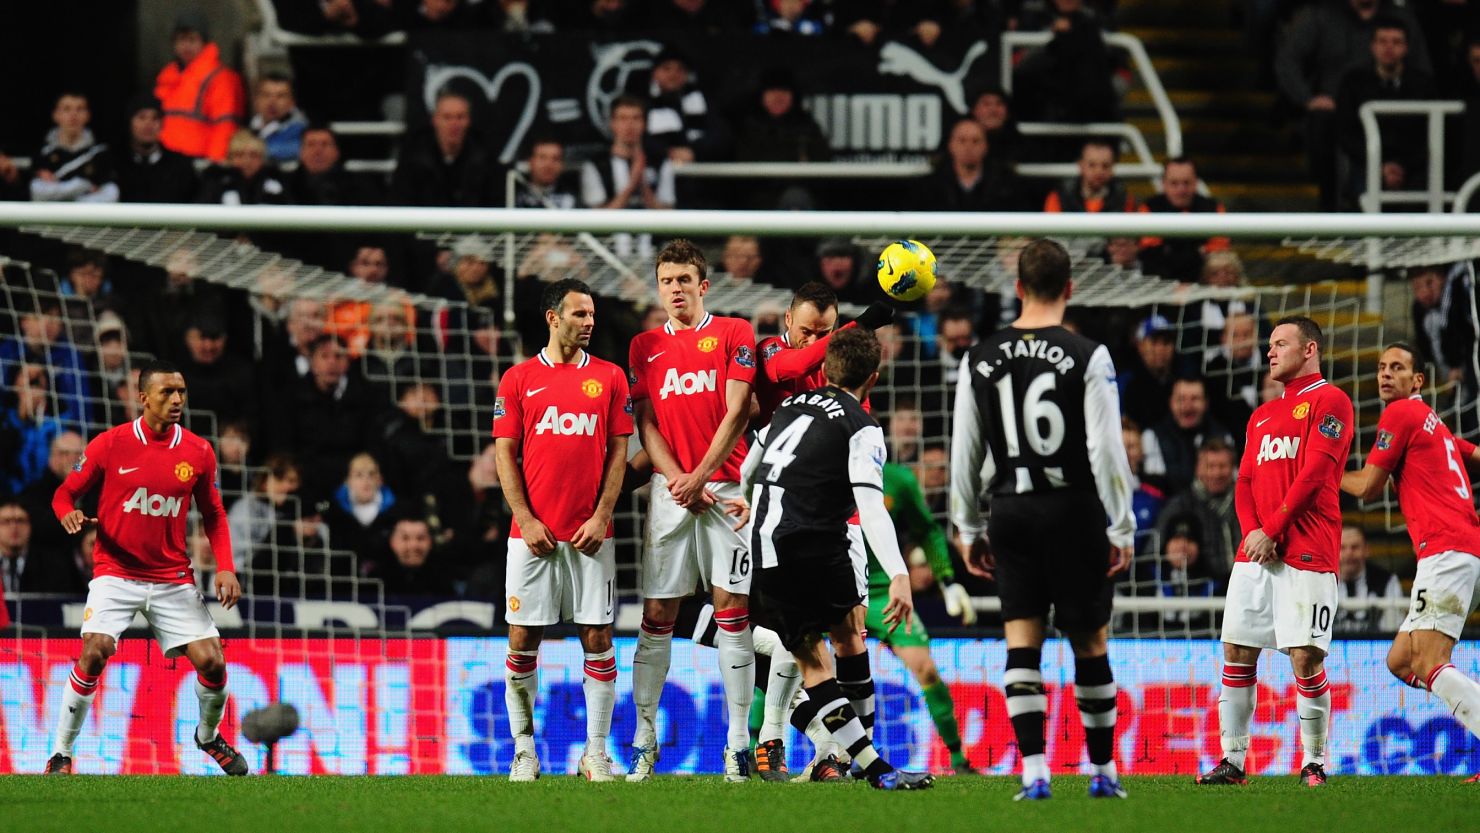 Yohan Cabaye scores Newcastle's second goal with a superb free-kick that went in off the underside of crossbar.